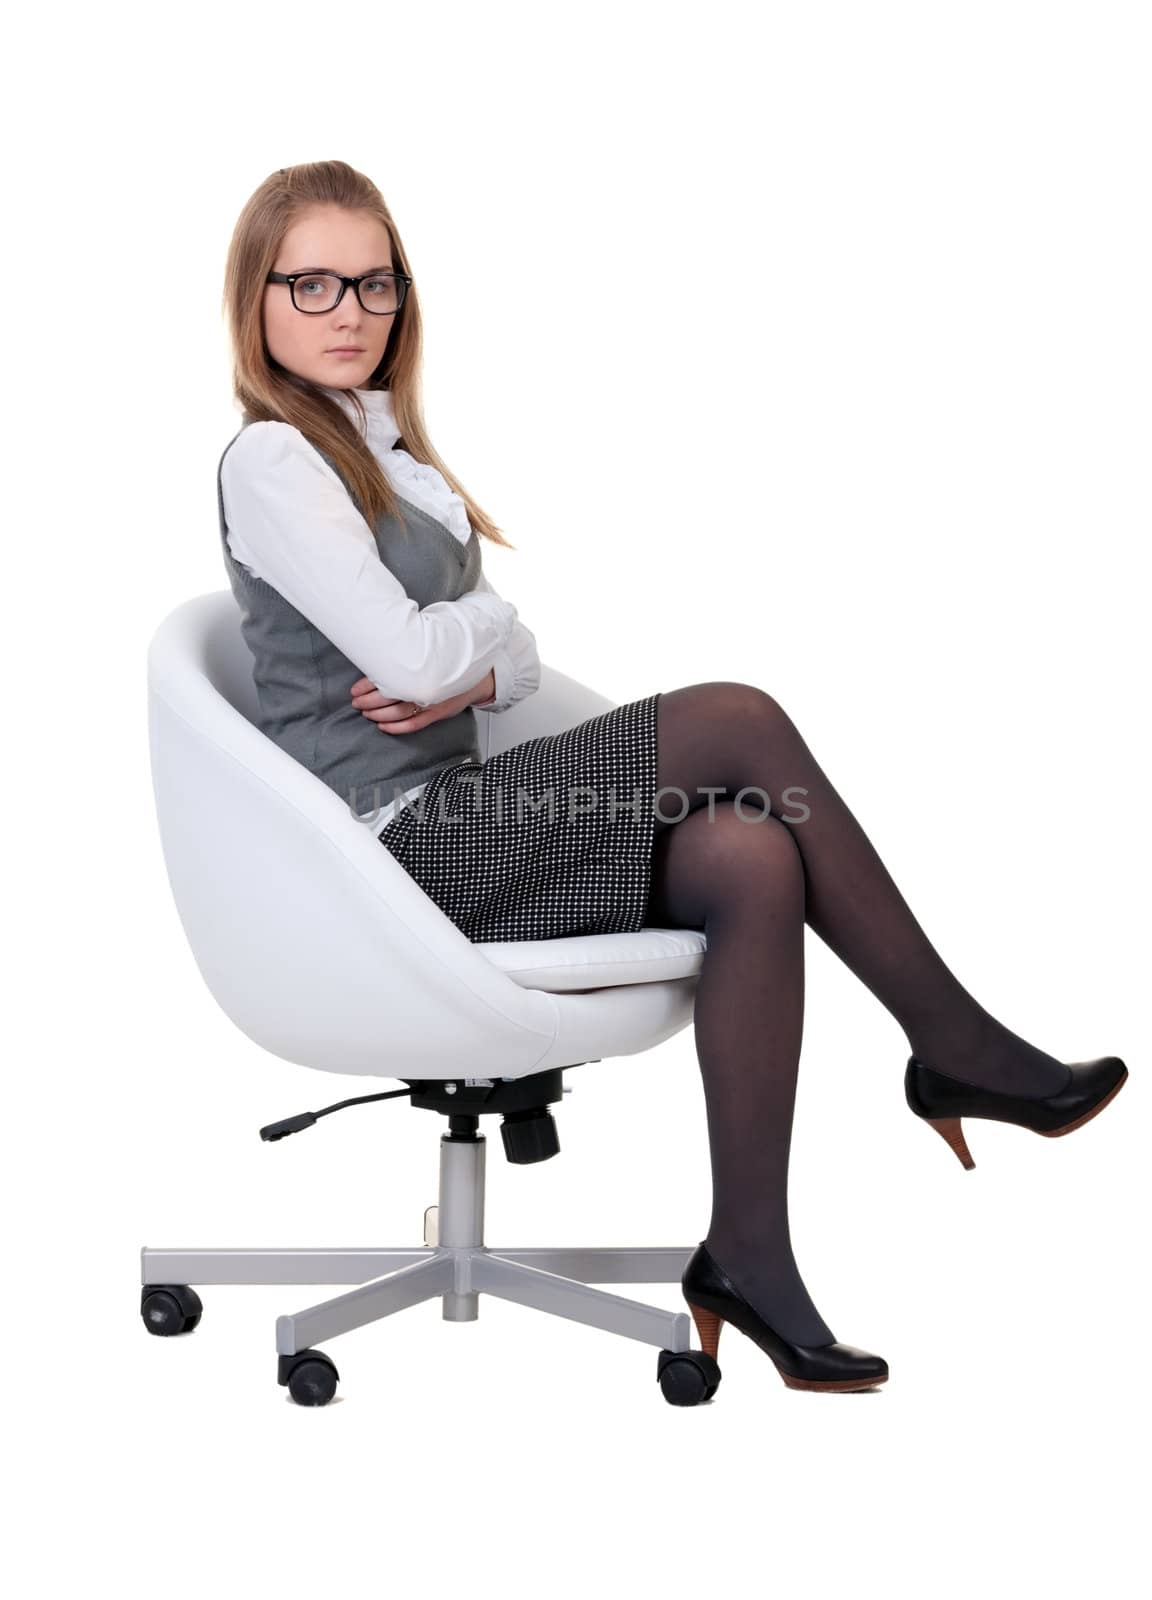 strong girl sitting in an armchair on a white background